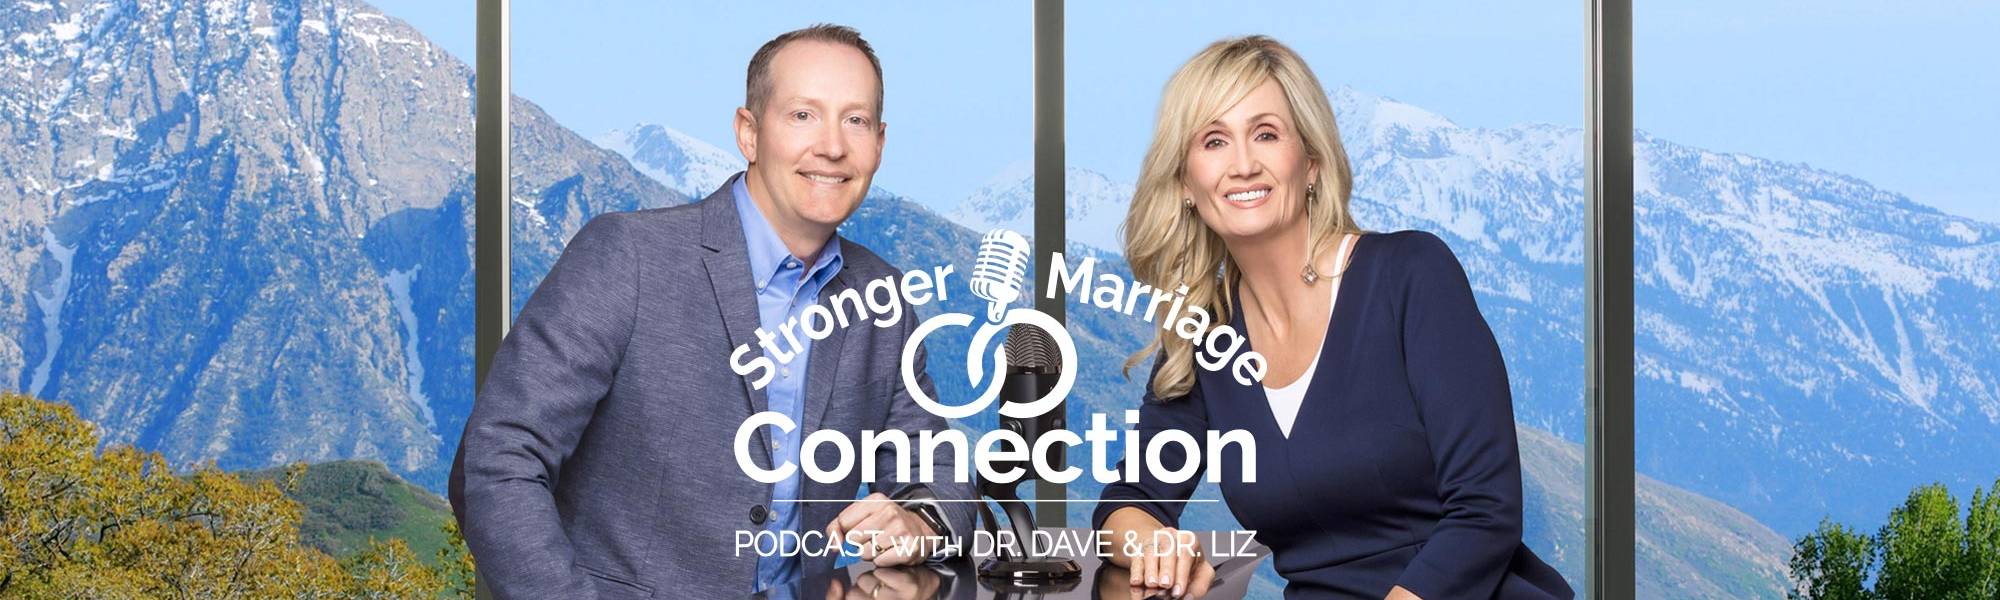 Stronger Marriage Connection Podcast with Doctor Dave and Doctor Liz